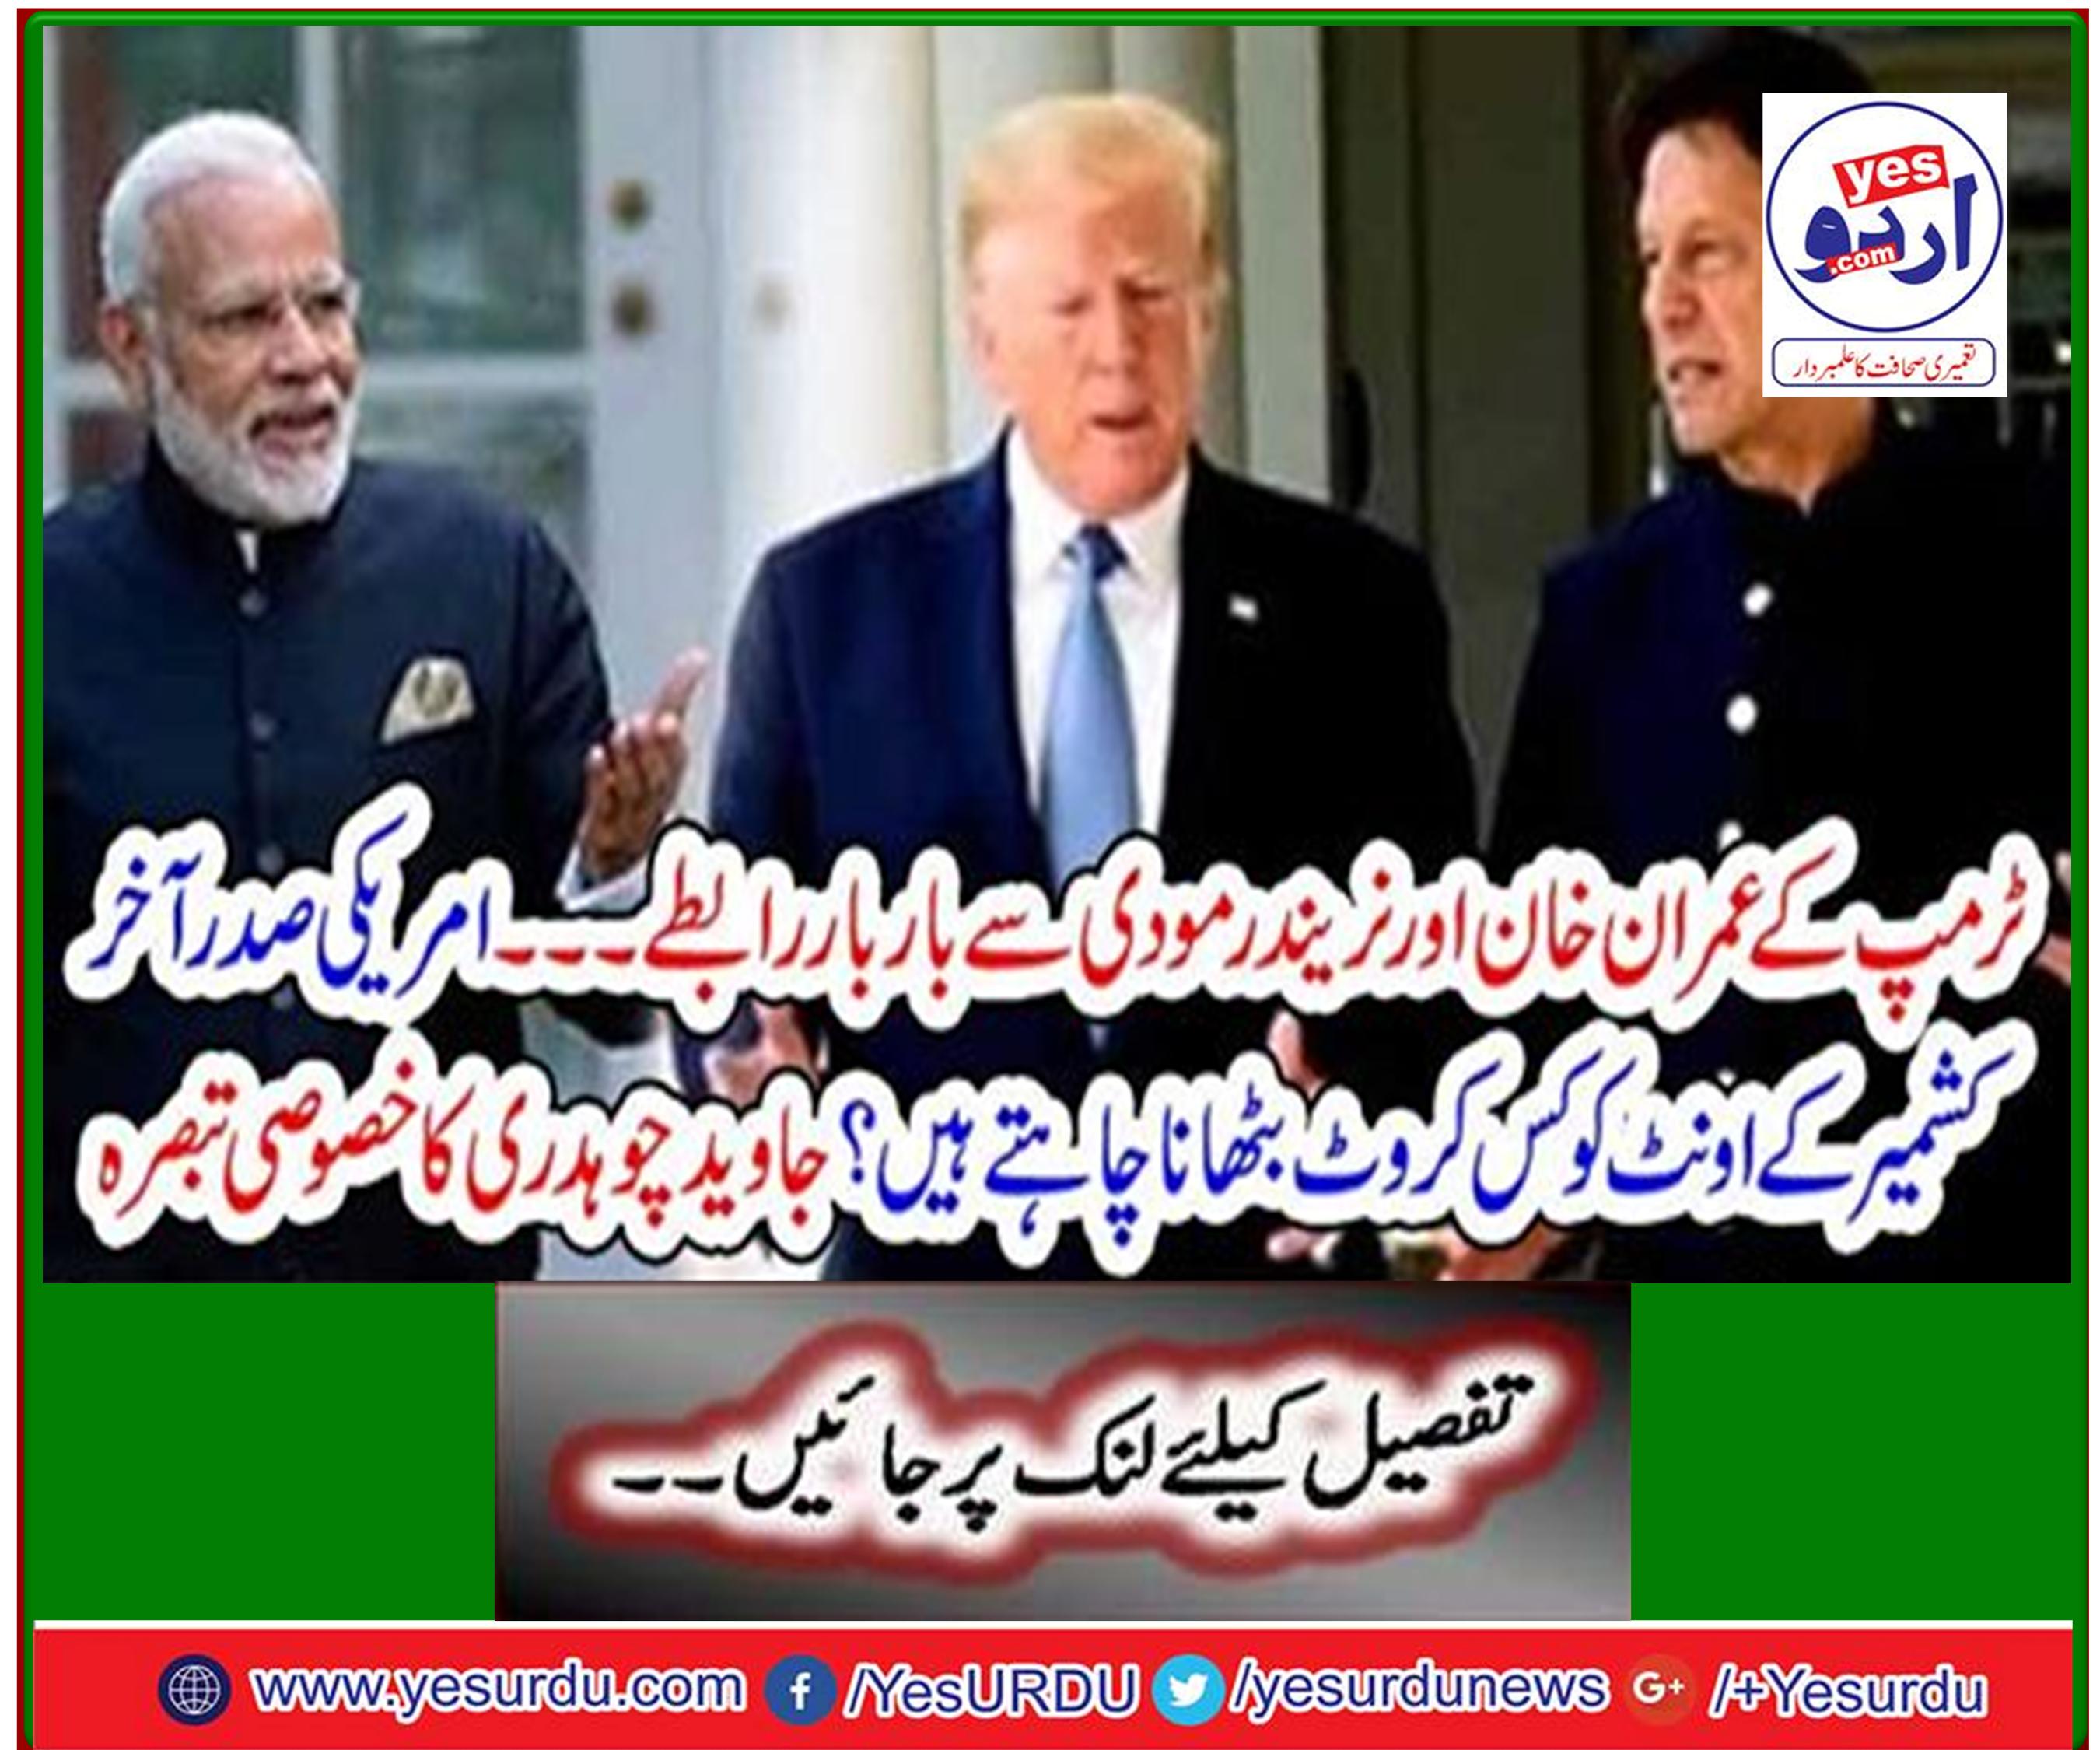 How much do US President finally want to raise Kashmir's camel? Special comment by Javed Chaudhry